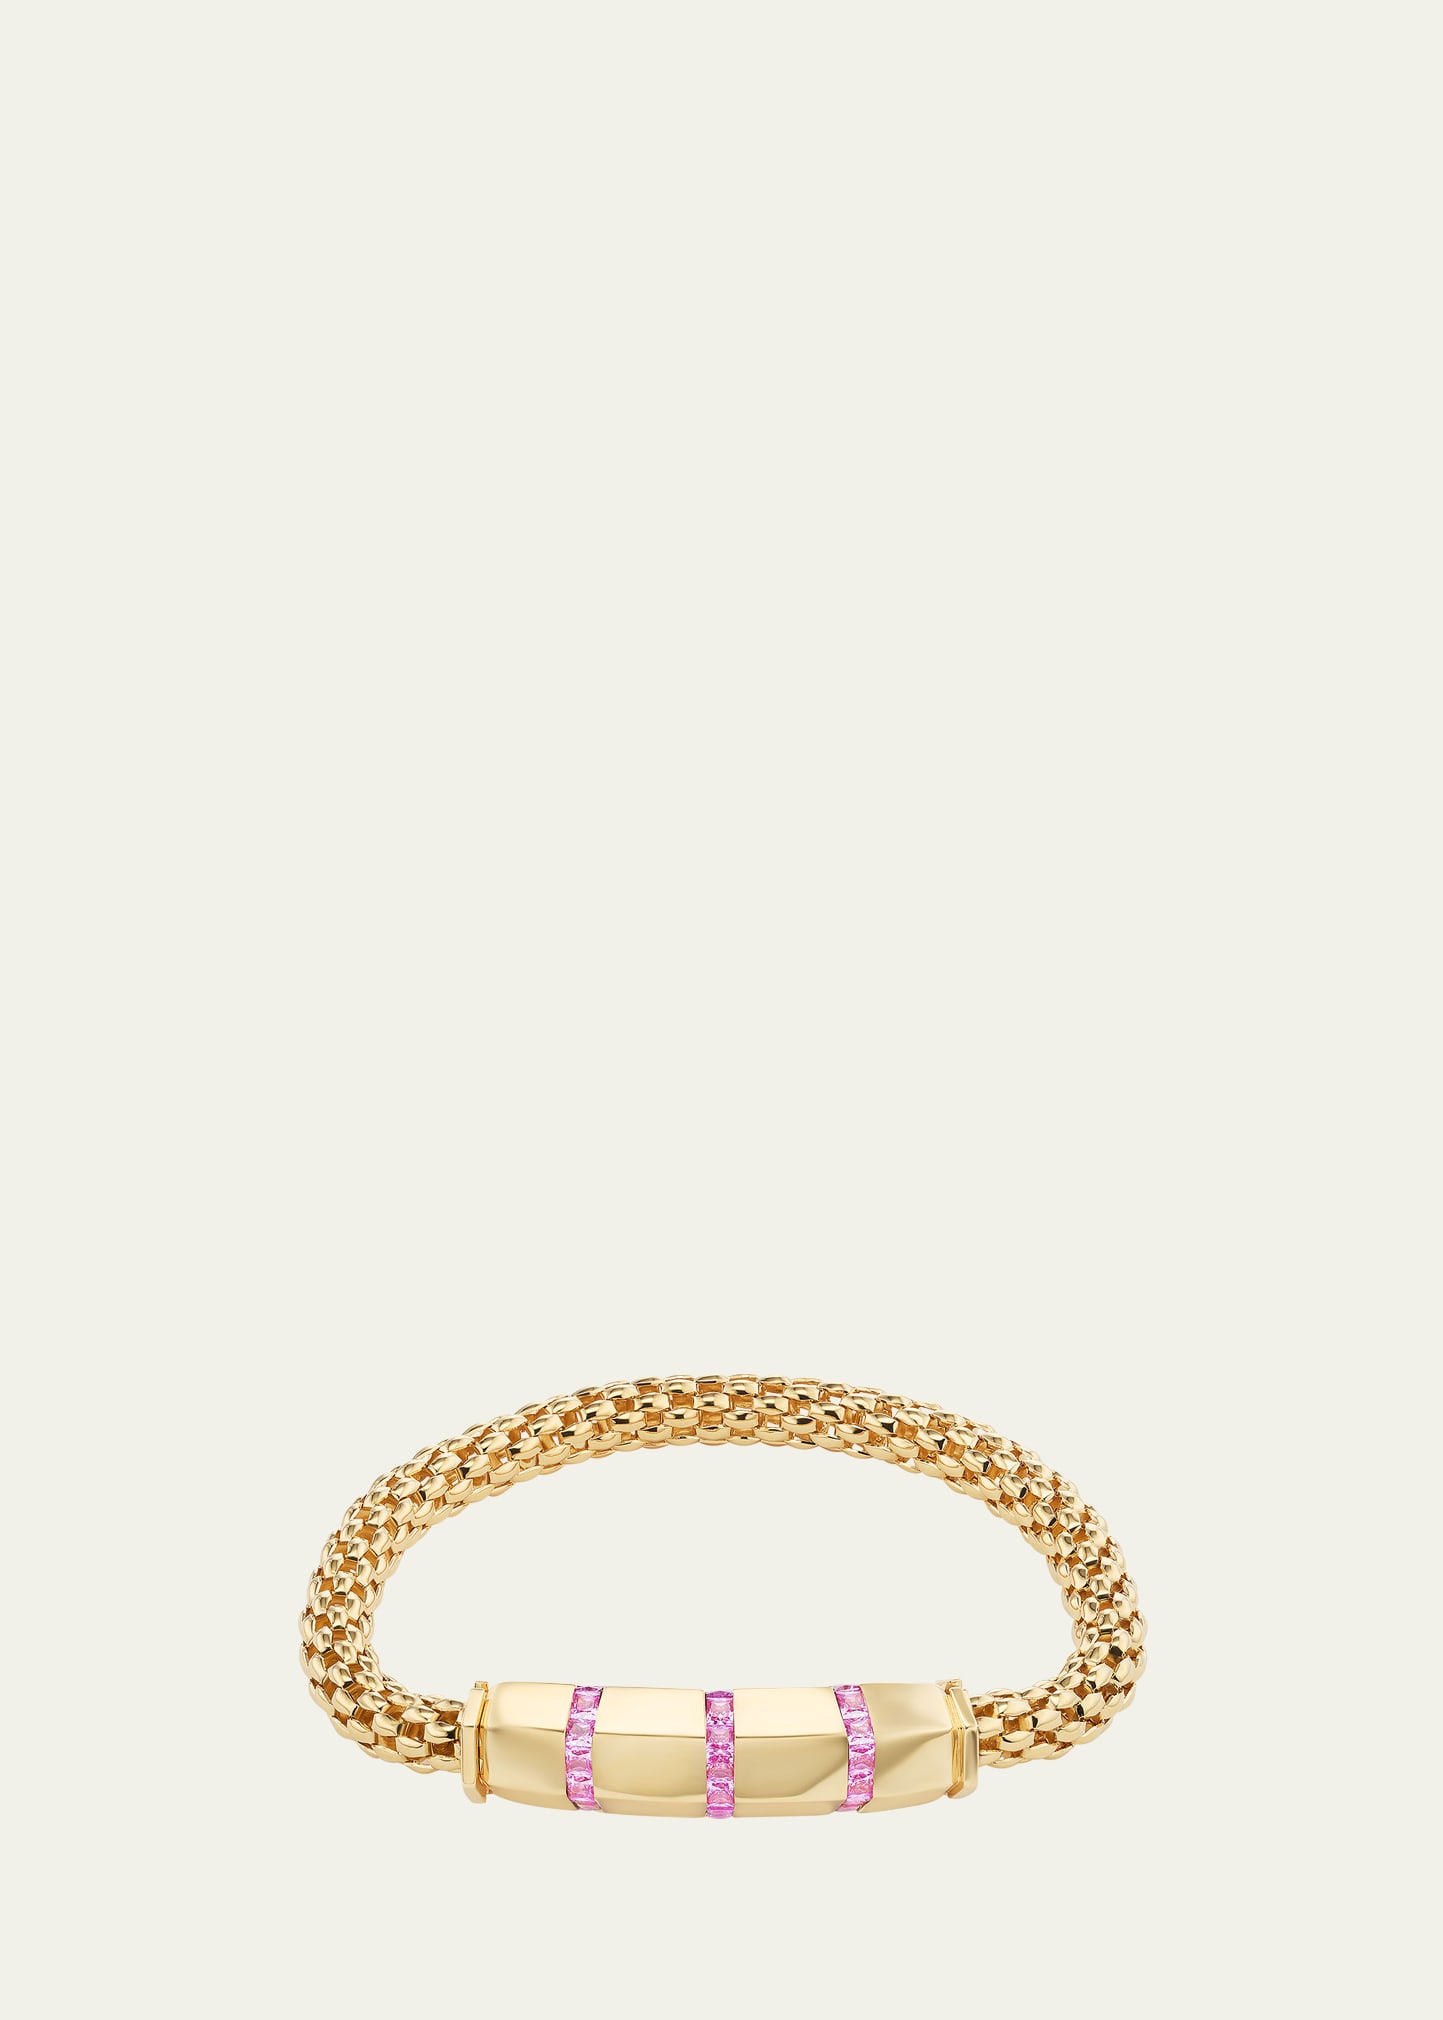 Stella Bar Bracelet in Yellow Gold with Pink Sapphire, Size S